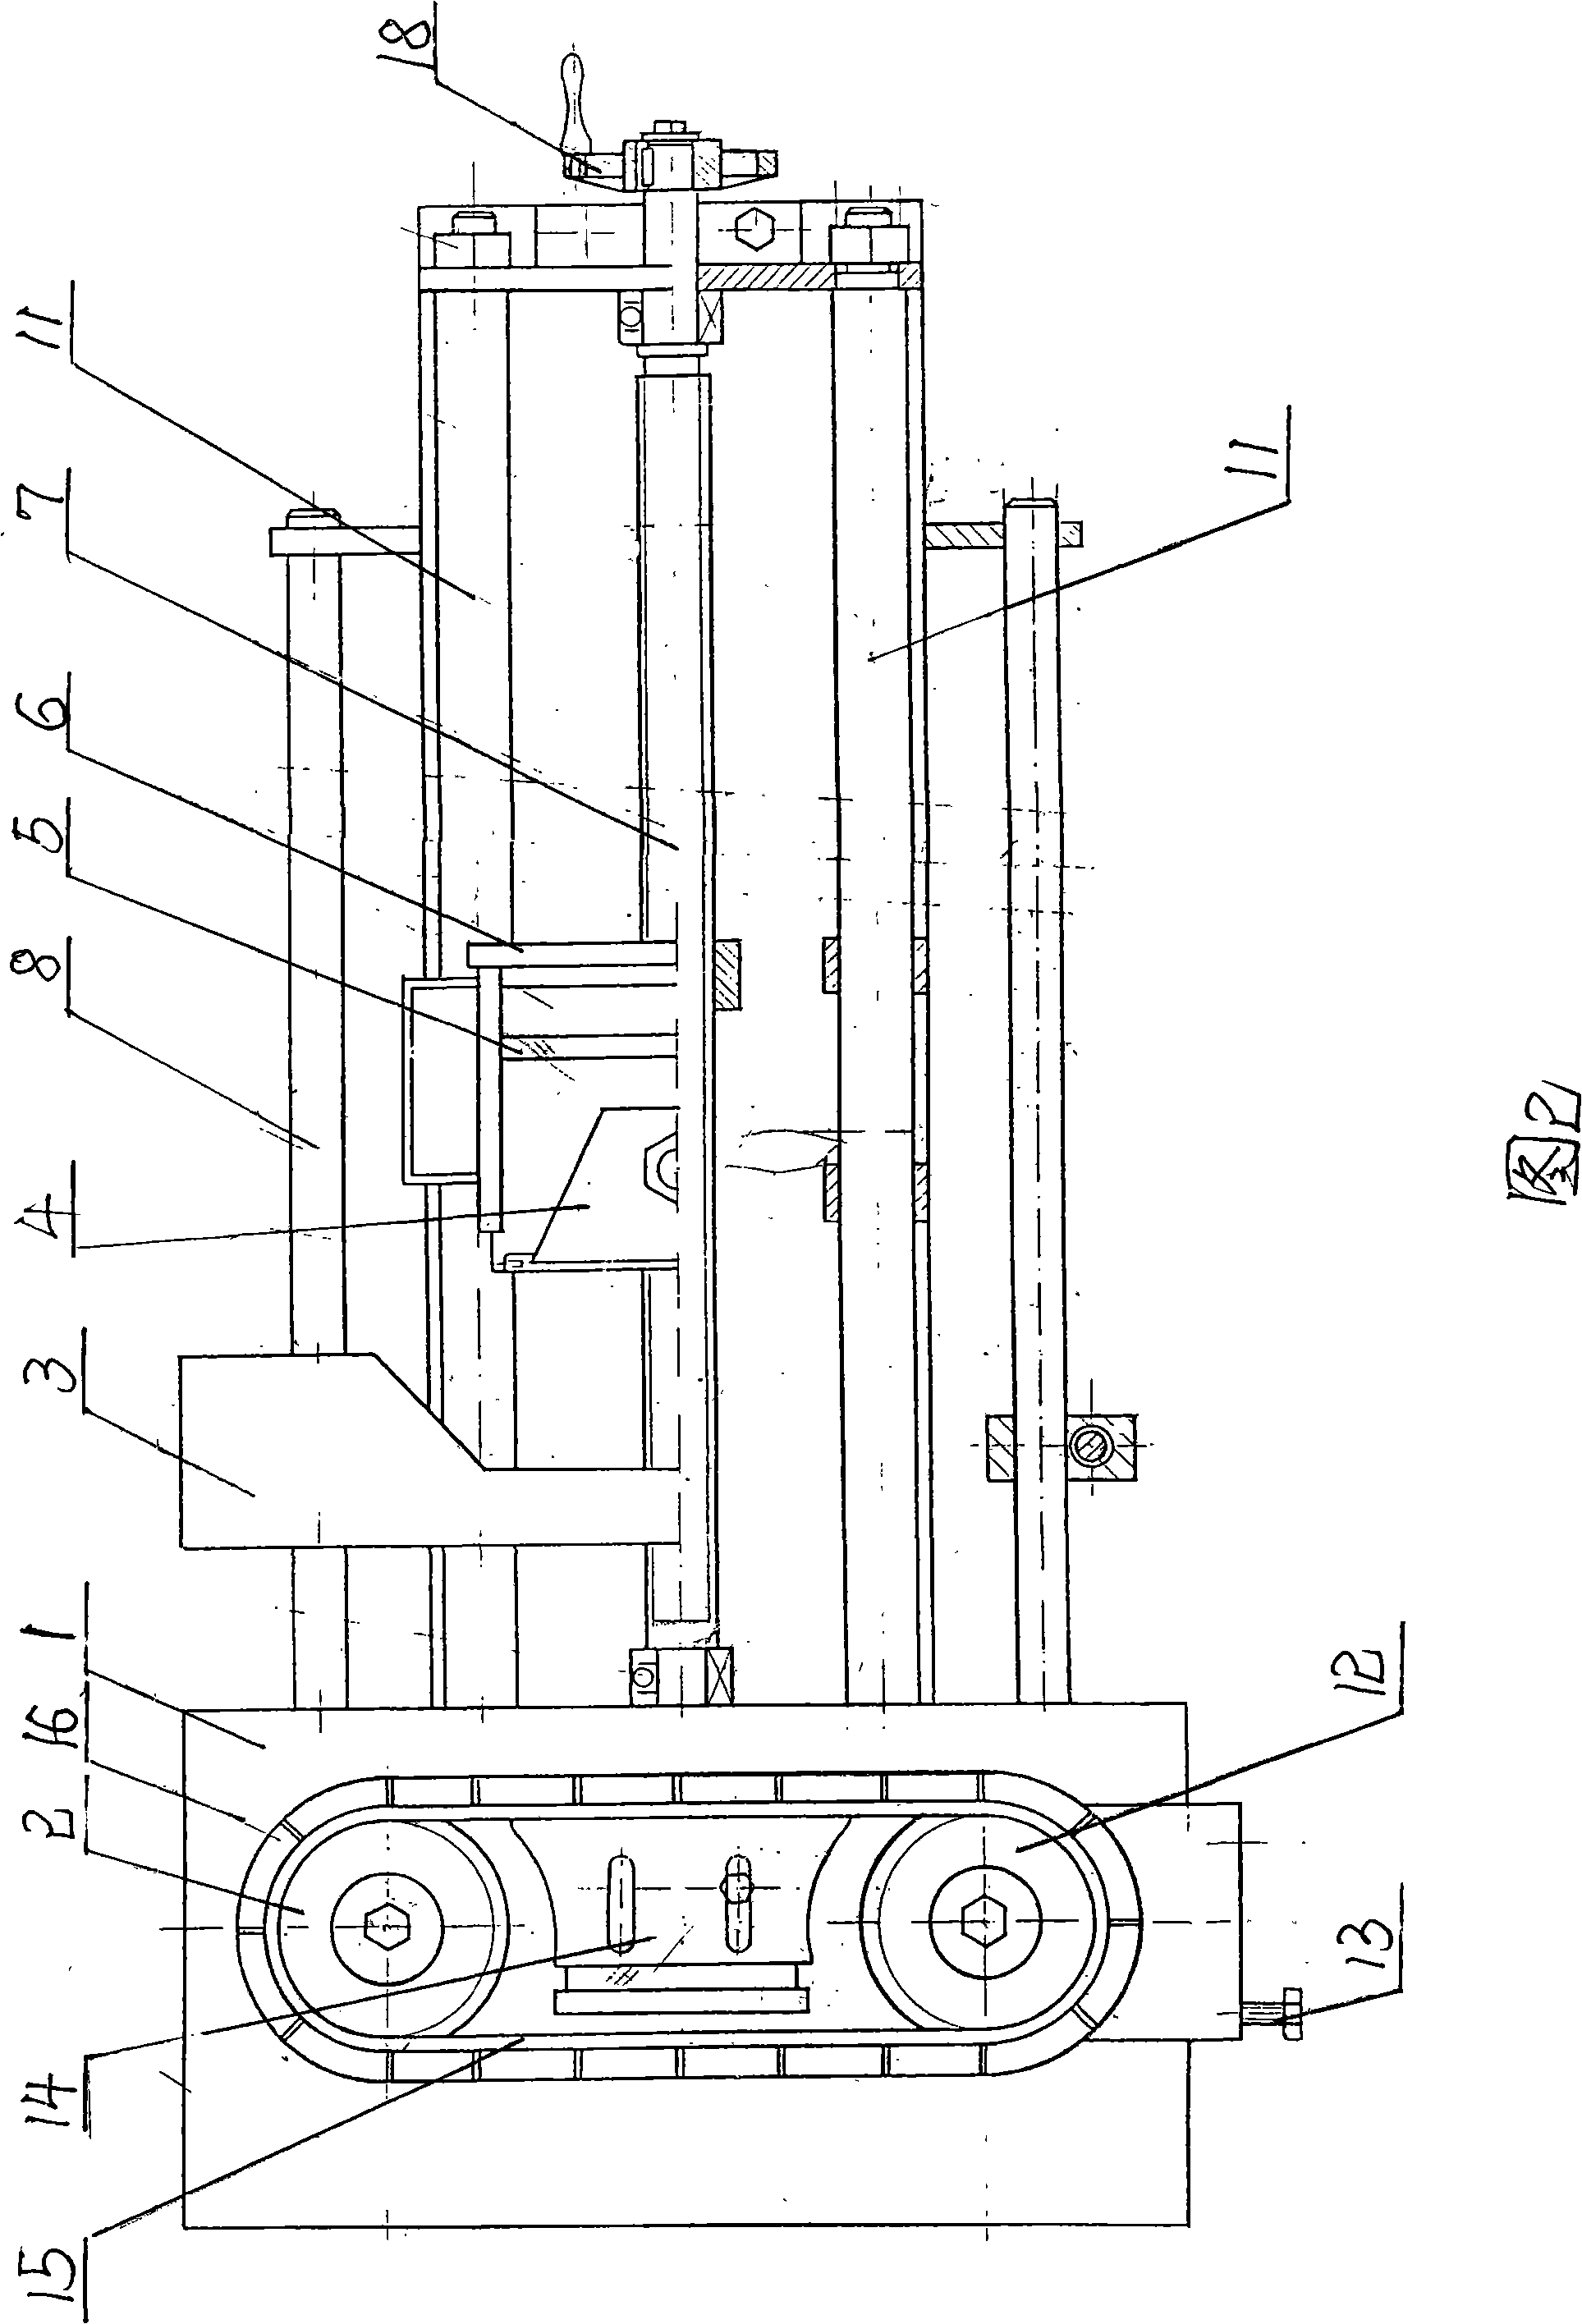 Word-carving machine for flange